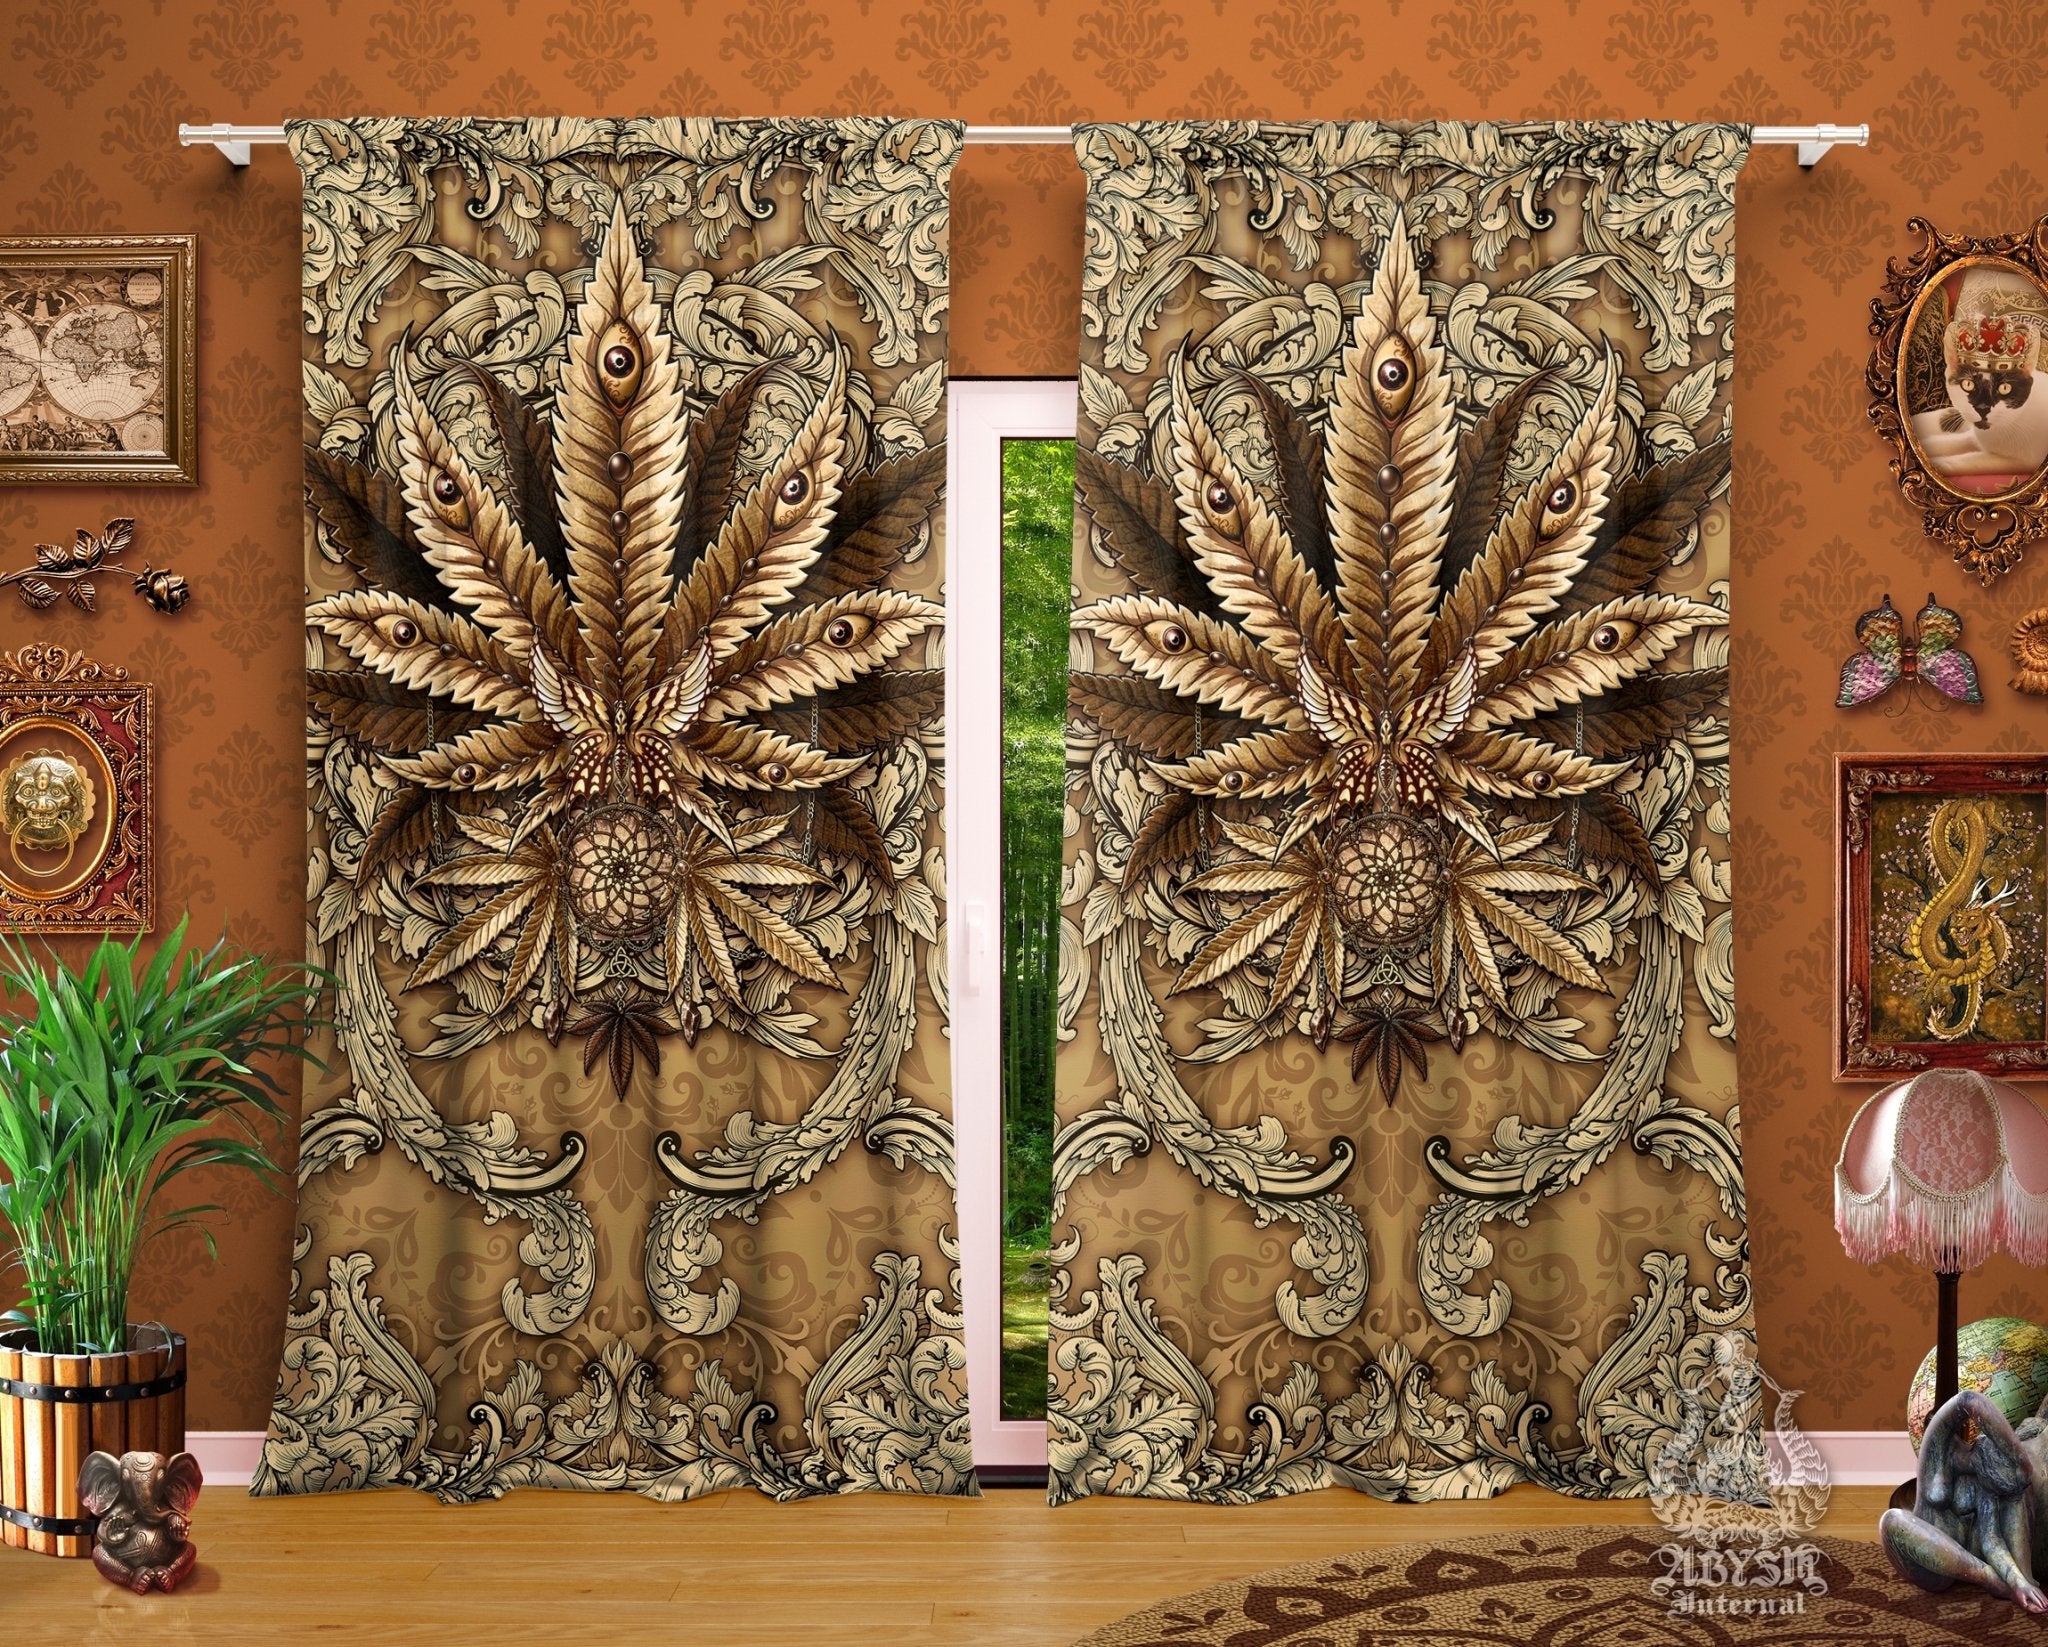 Weed Blackout Curtains, Cannabis Home and Shop Decor, Long Window Panels, Indie Hippie Print, 420 Room Art - Cream - Abysm Internal